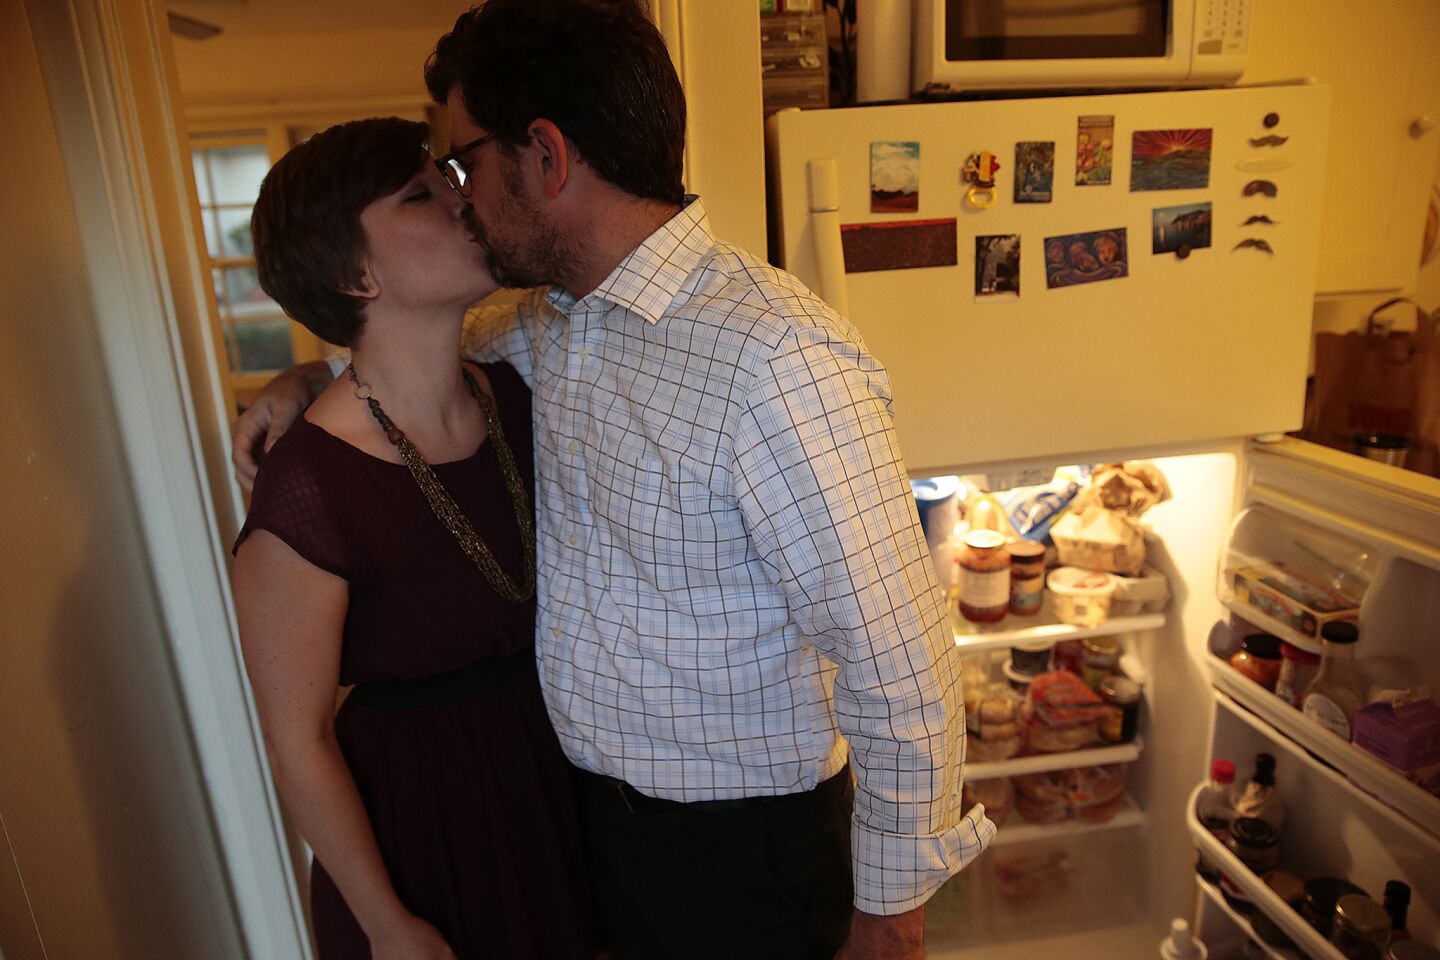 Ryan Bell, a former Seventh-day Adventist pastor who decided to live the last 12 months as if there is no God, is greeted by girlfriend Rebecca Pratt -- a devoted Christian -- at his Pasadena apartment. After Jan. 1, he'll announce where he stands on the existence of a supreme deity.